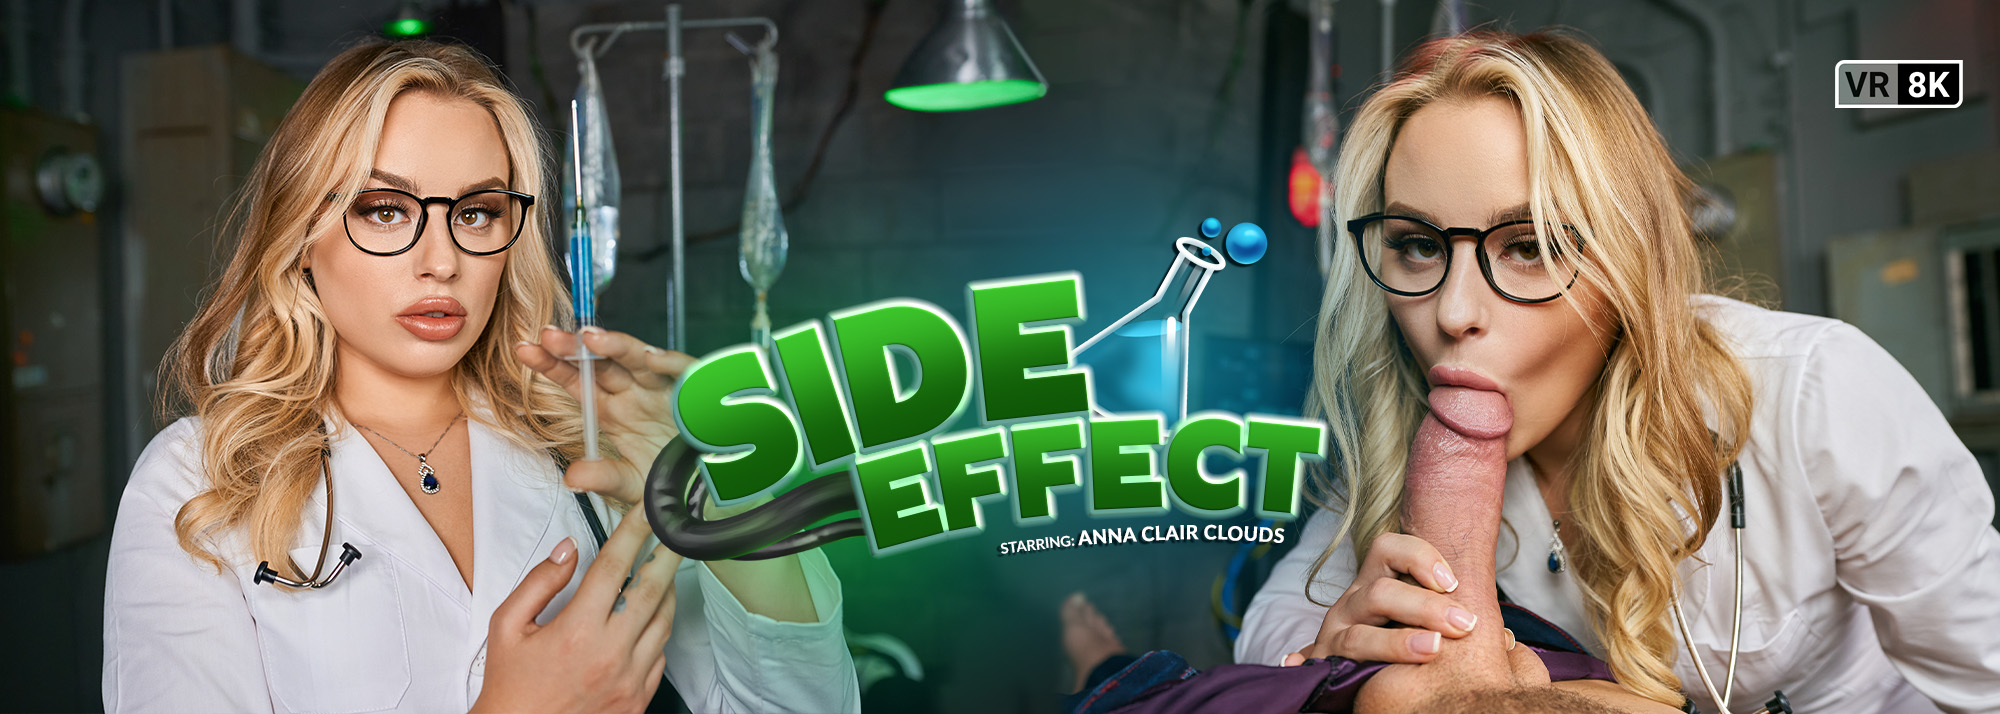 Side Effect with Anna Claire Clouds  Slideshow